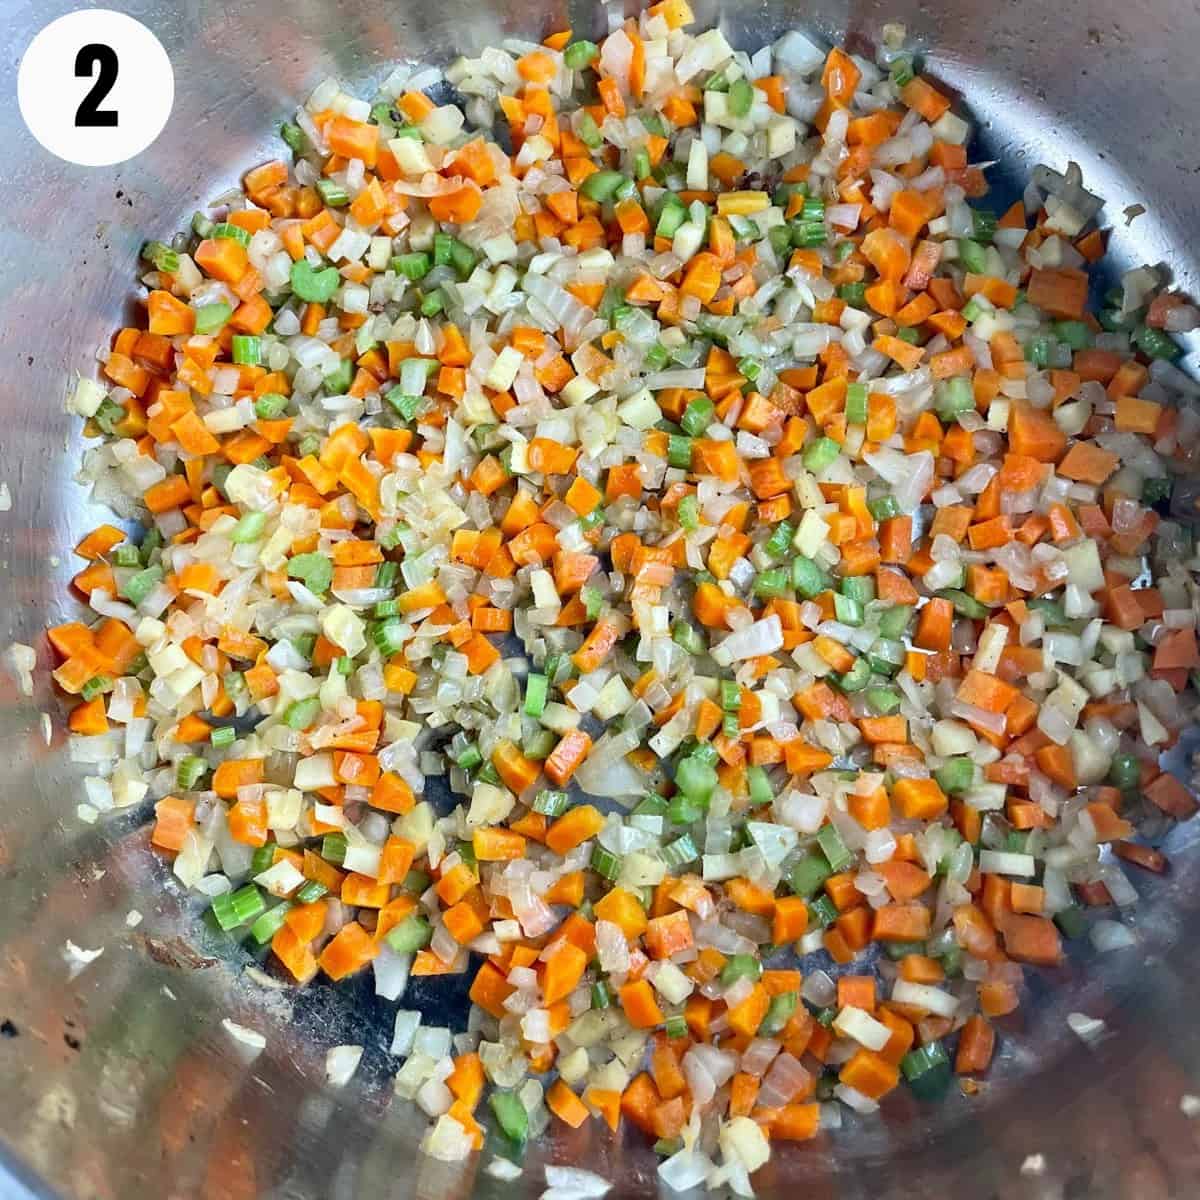 Diced carrots, onion, and celery, being sautéed in a pan.